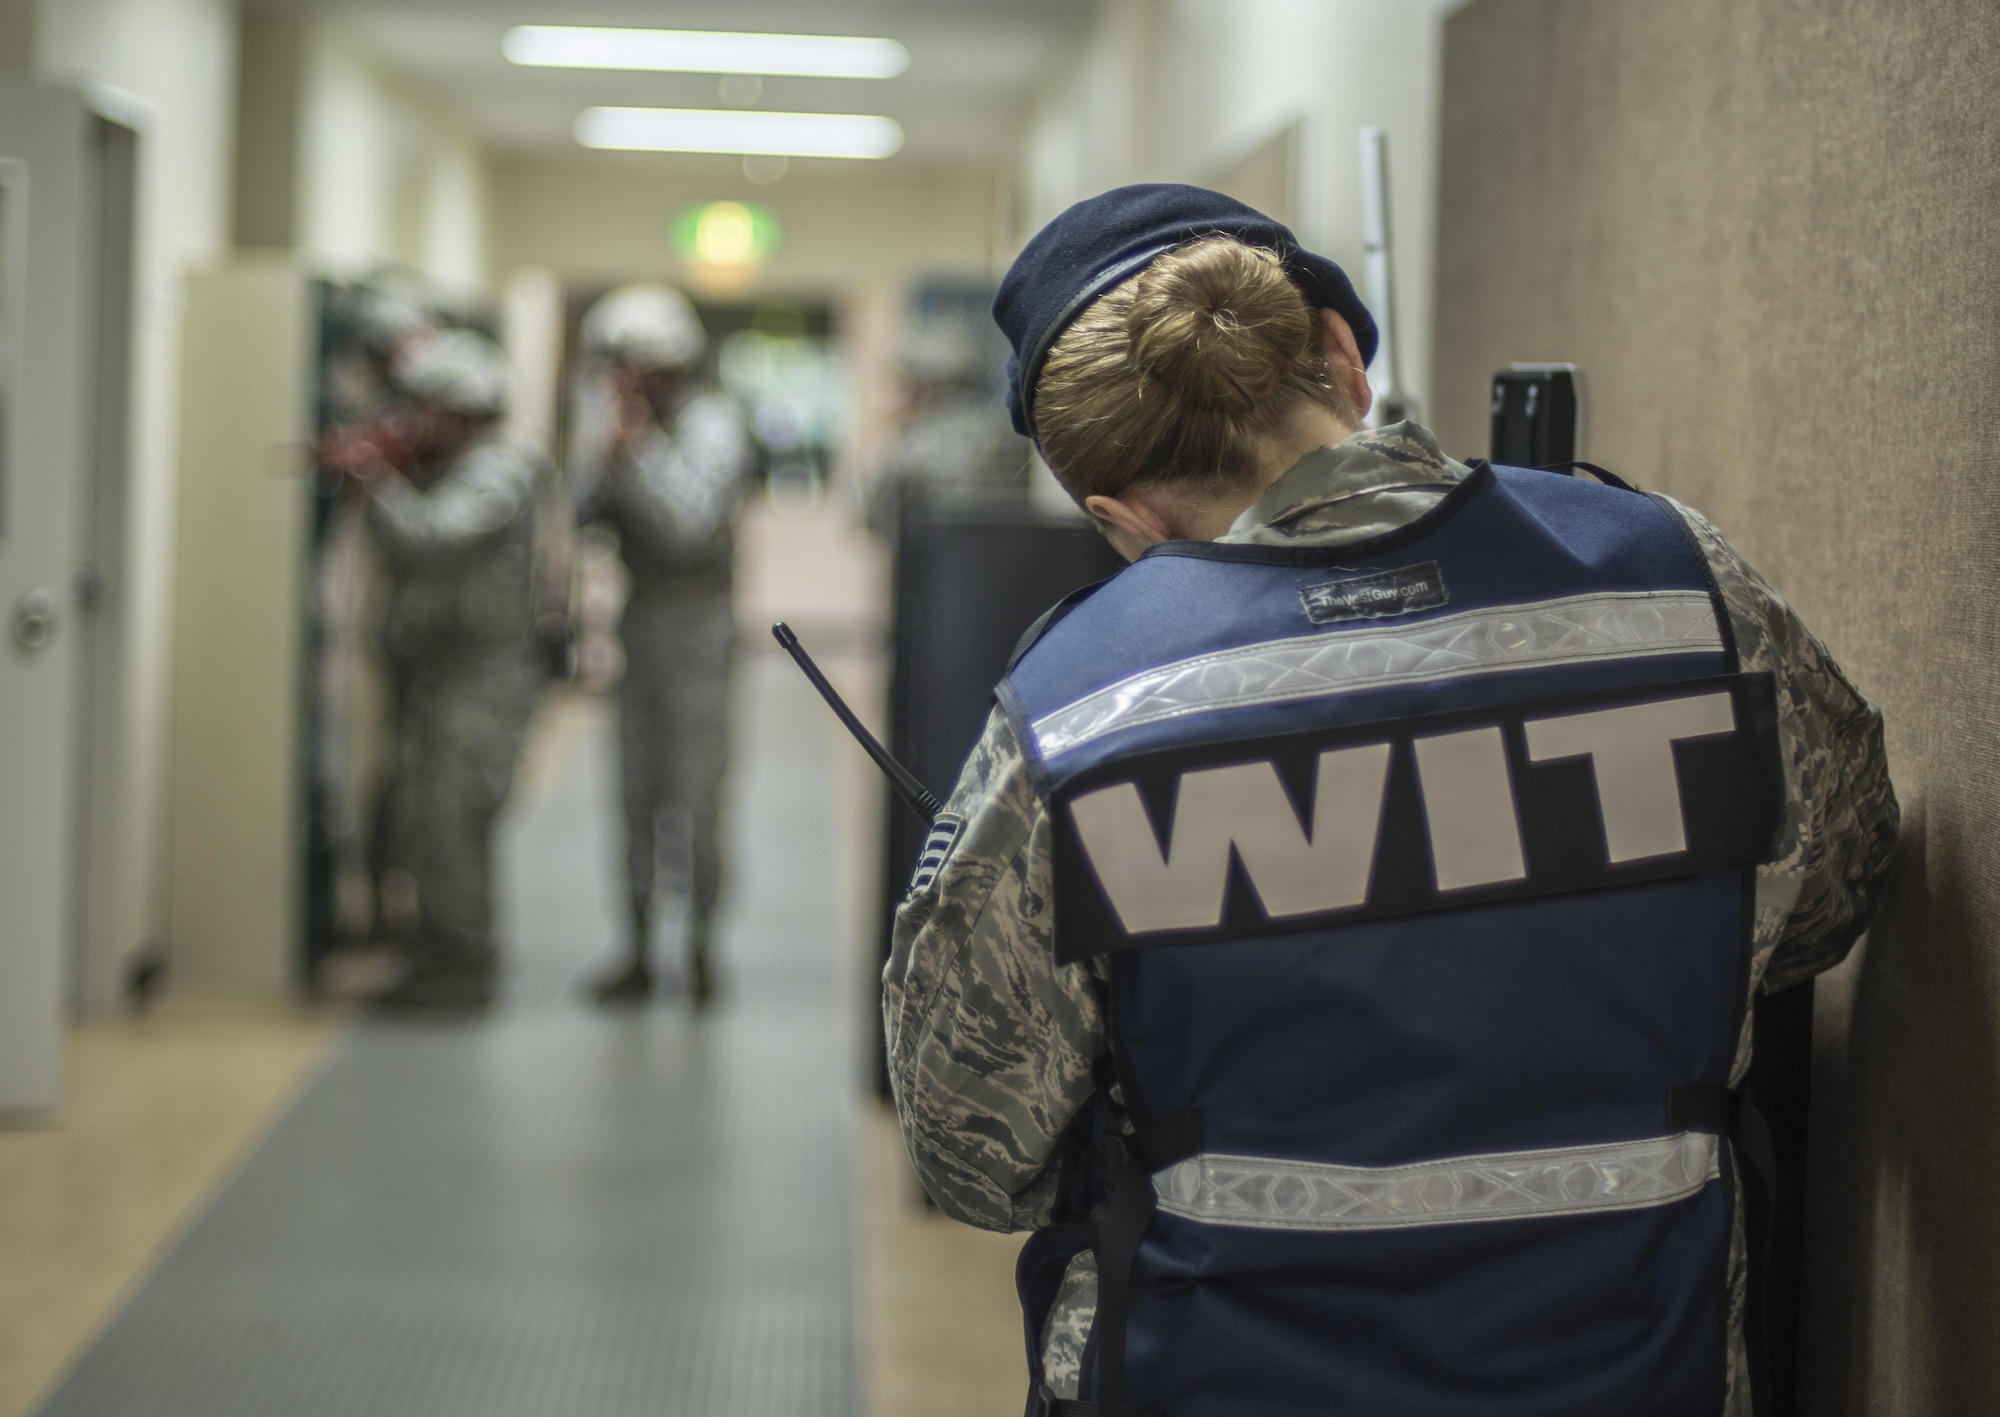 U.S. Air Force Staff Sgt. Kathleen Sullivan, a standardization and evaluation member with the 35th Security Forces Squadron, observes security forces members as they clear rooms during the Beverly Sunrise 16-05 active shooter exercise held July 29, 2016, at Misawa Air Base, Japan. During the exercise, Sullivan evaluated security forces members' capabilities in responding to a crisis situation. (U.S. Air Force photo by Senior Airman Brittany A. Chase)